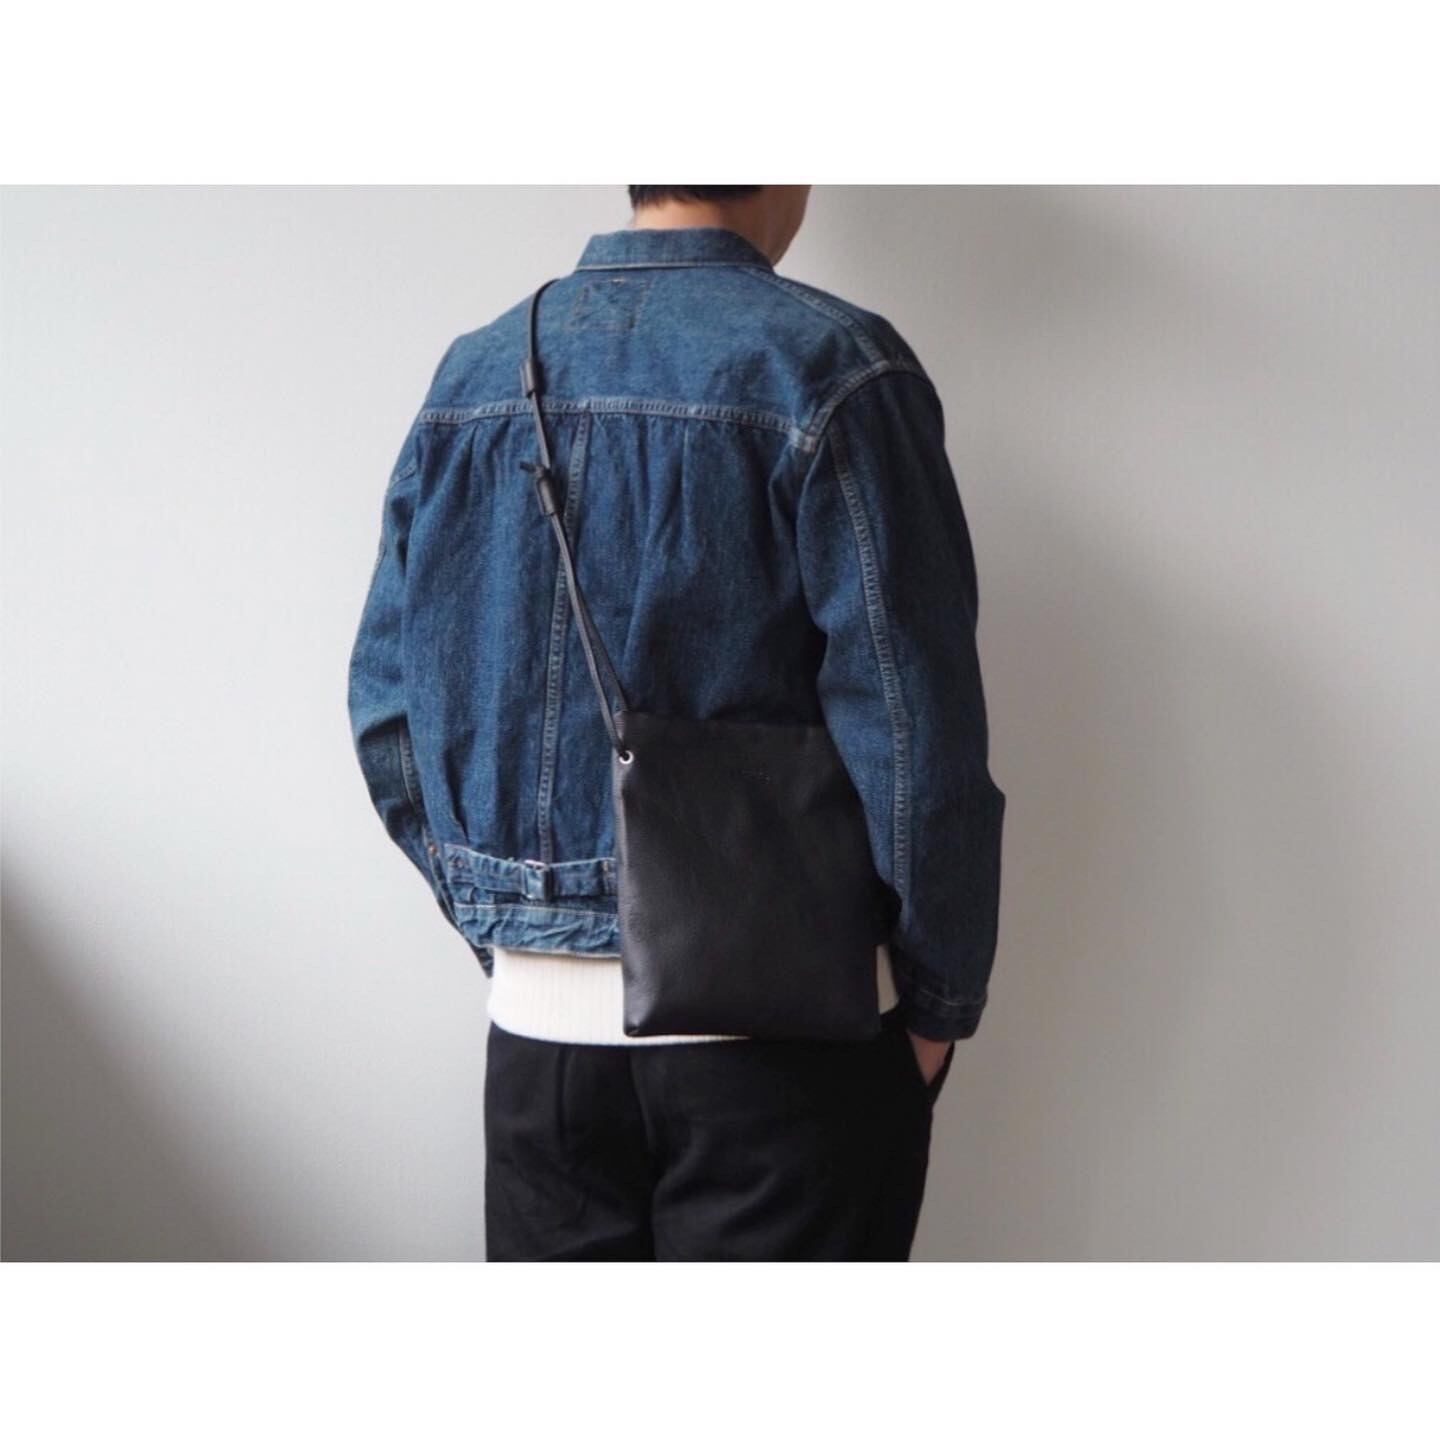 SLOW(スロウ) Embossing Shoulder Bag L | AUTHENTIC Life Store powered by BASE